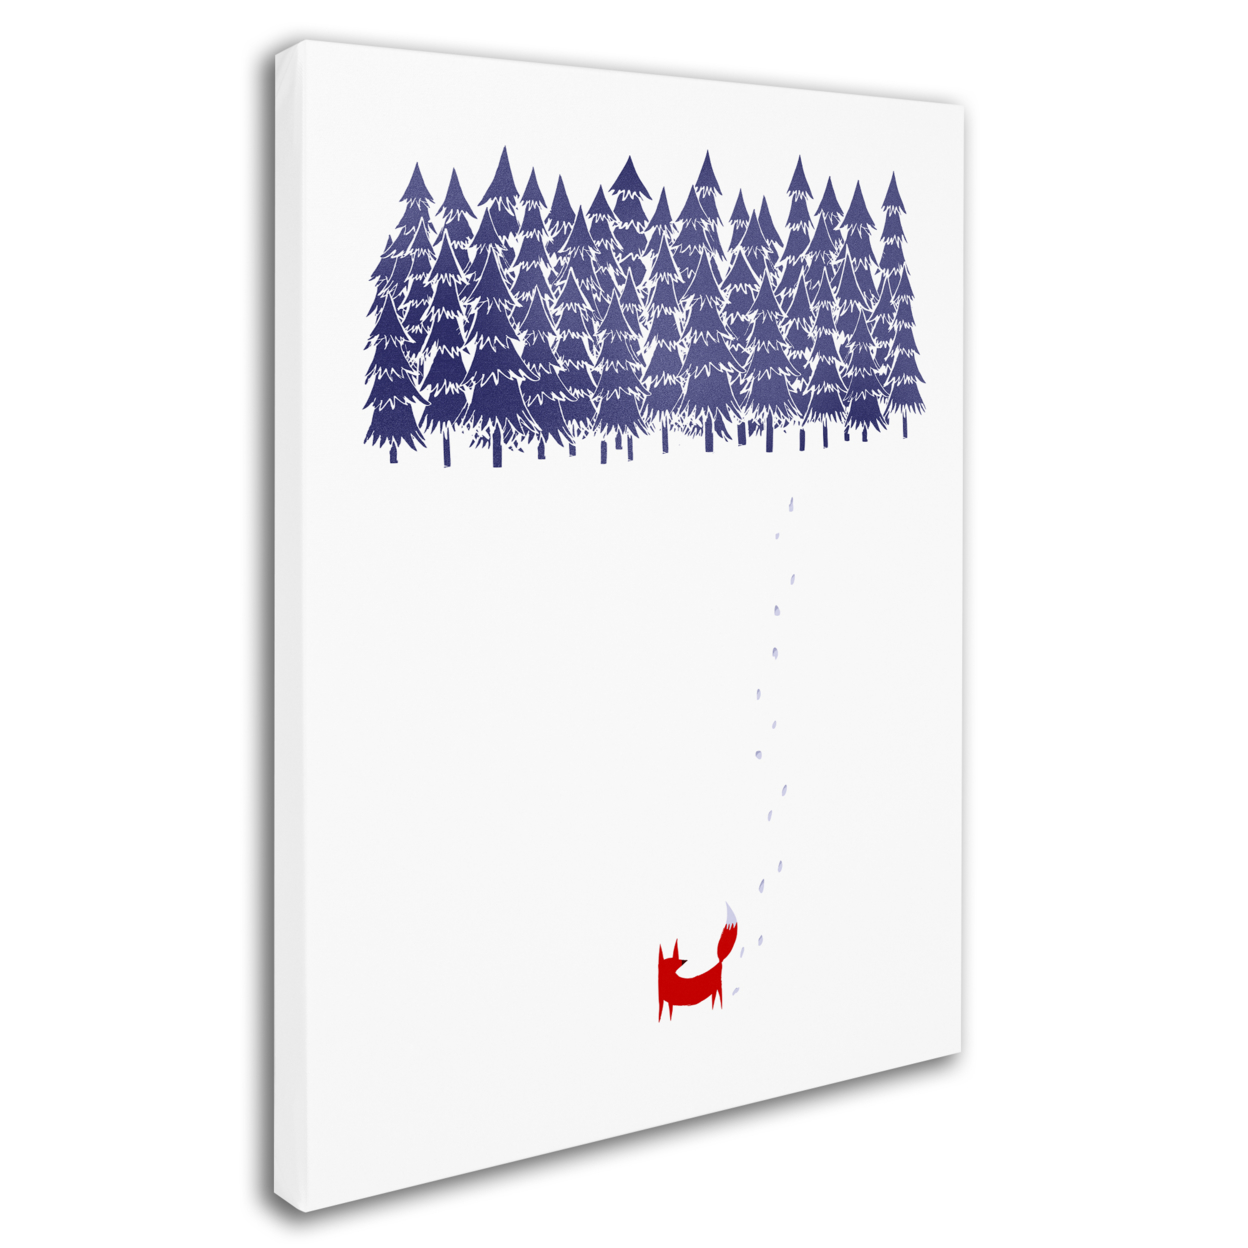 Robert Farkas 'Alone In The Forest' 14 X 19 Canvas Art